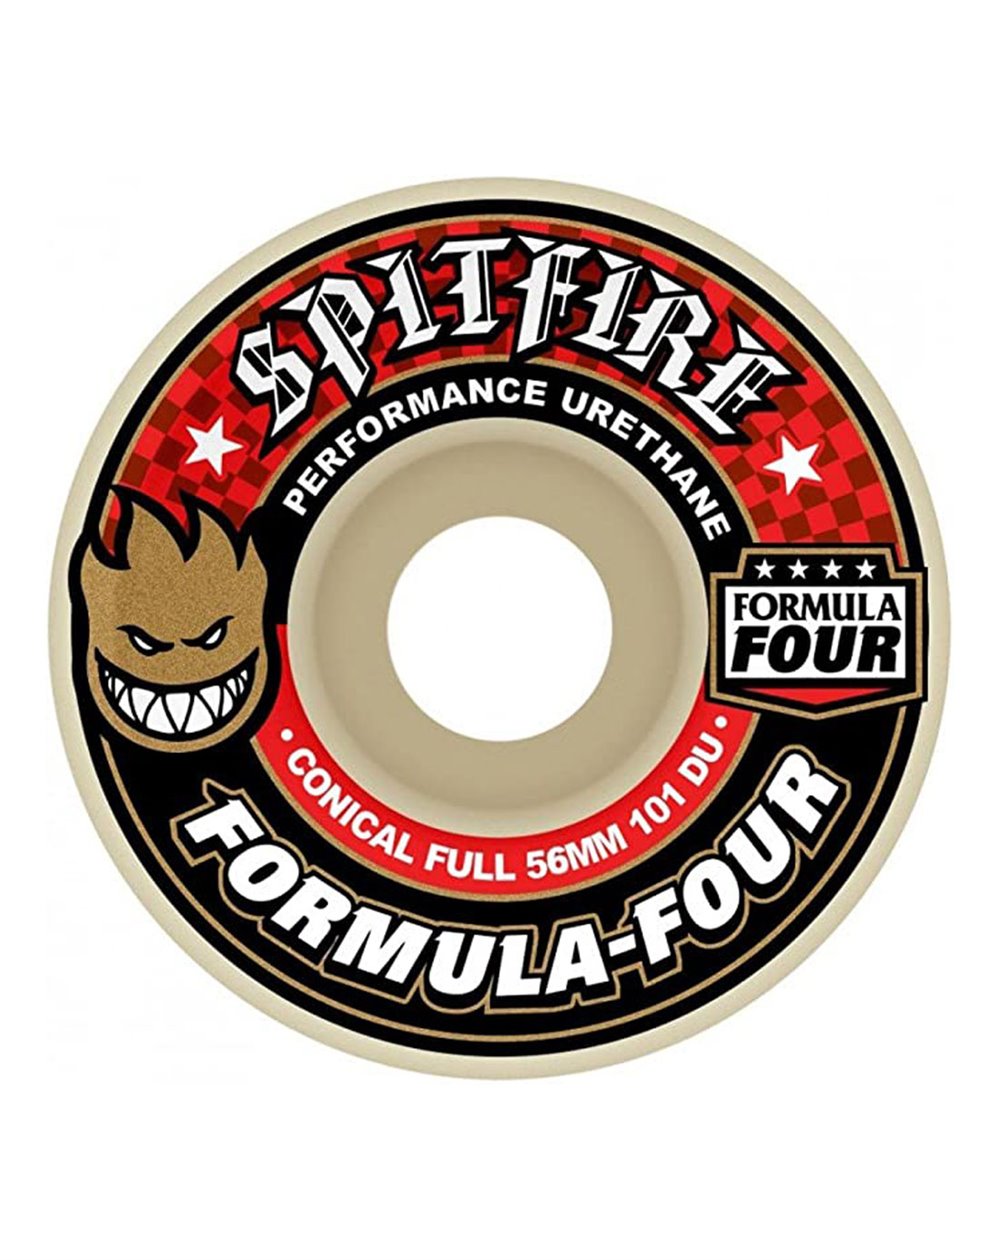 Spitfire Roues Skateboard Formula Four Conical Full 56mm 101A 4 pc